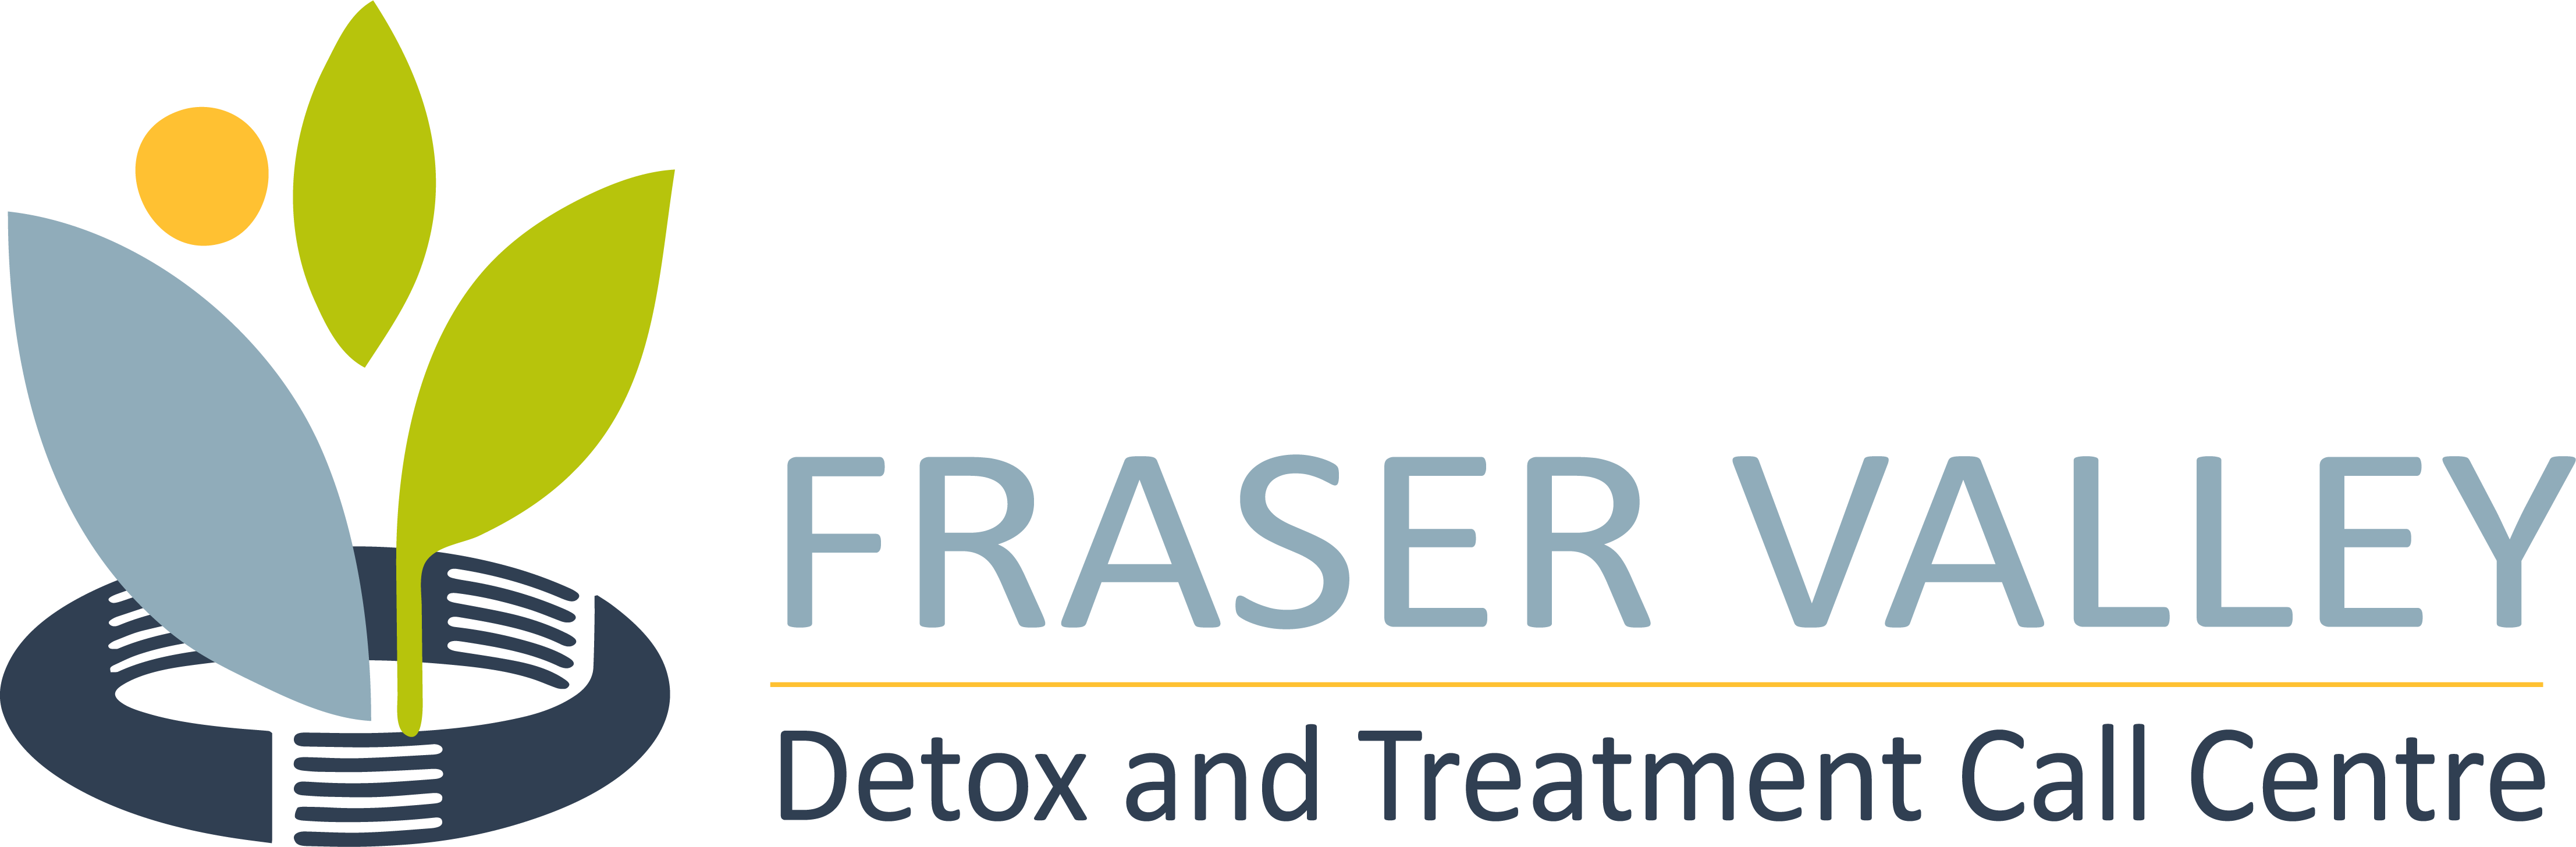 Fraser Valley Detox and Treatment Call Centre